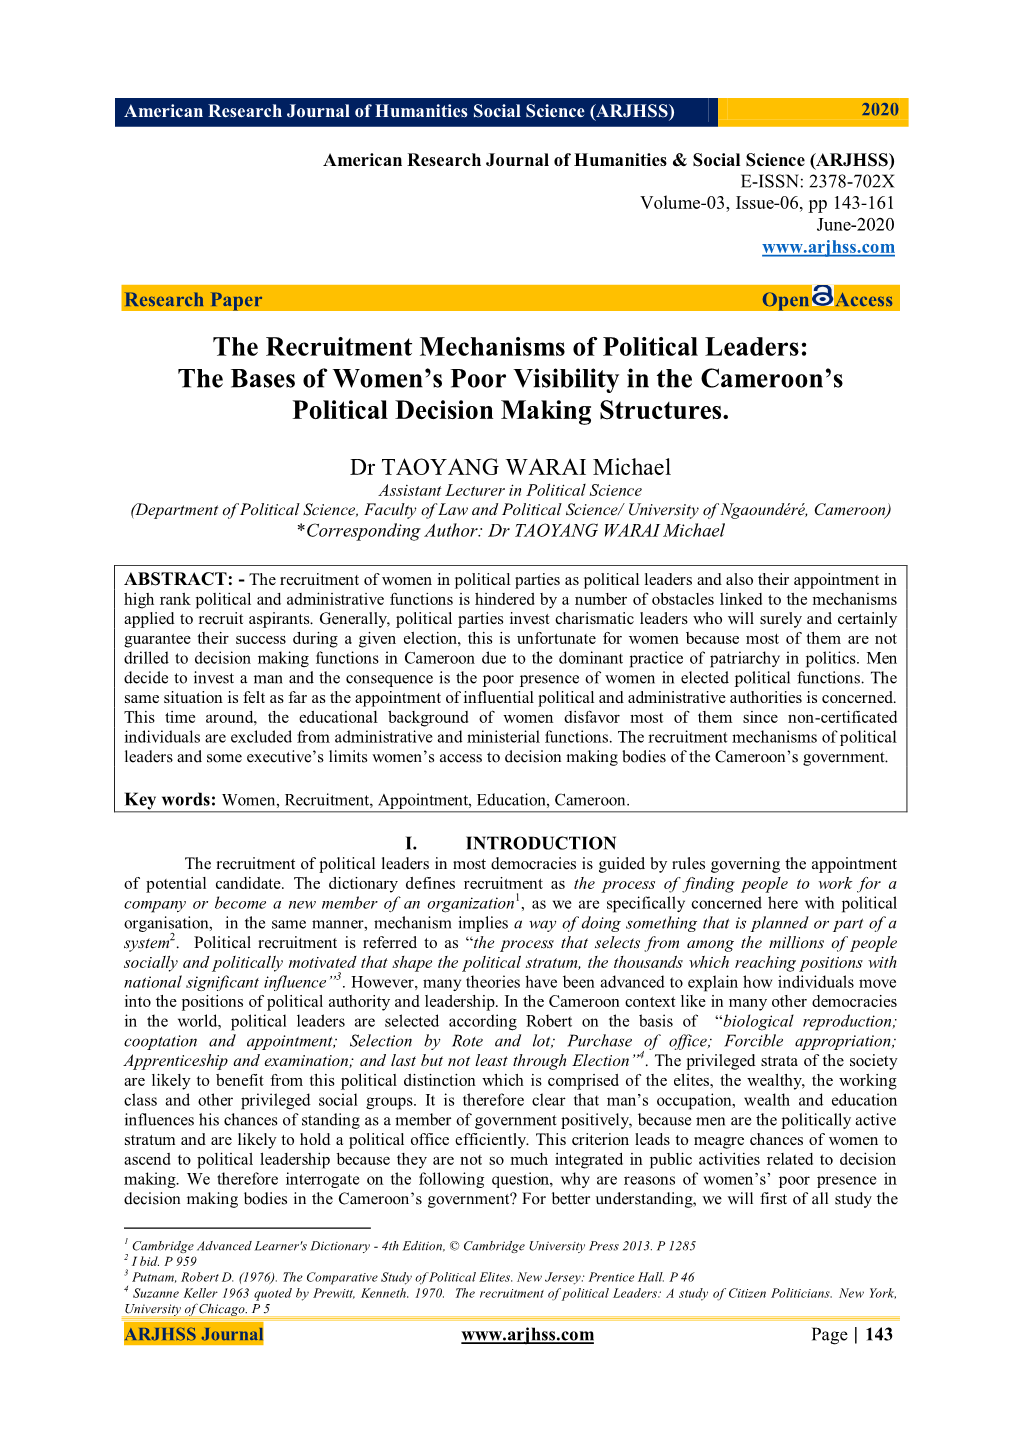 The Recruitment Mechanisms of Political Leaders: the Bases of Women’S Poor Visibility in the Cameroon’S Political Decision Making Structures